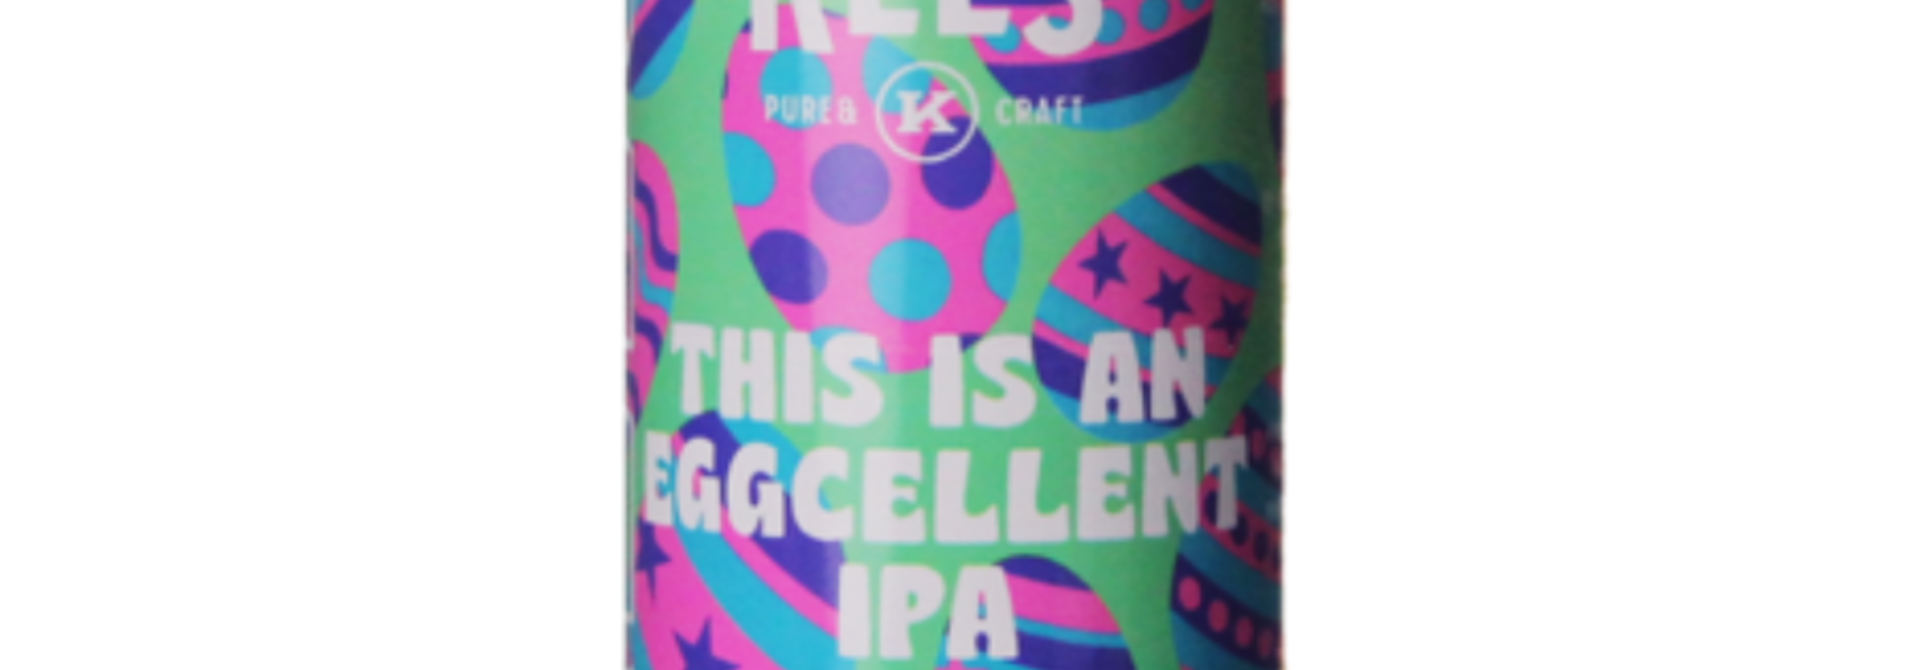 Kees (This is an) Eggcellent IPA 44CL 4,9%